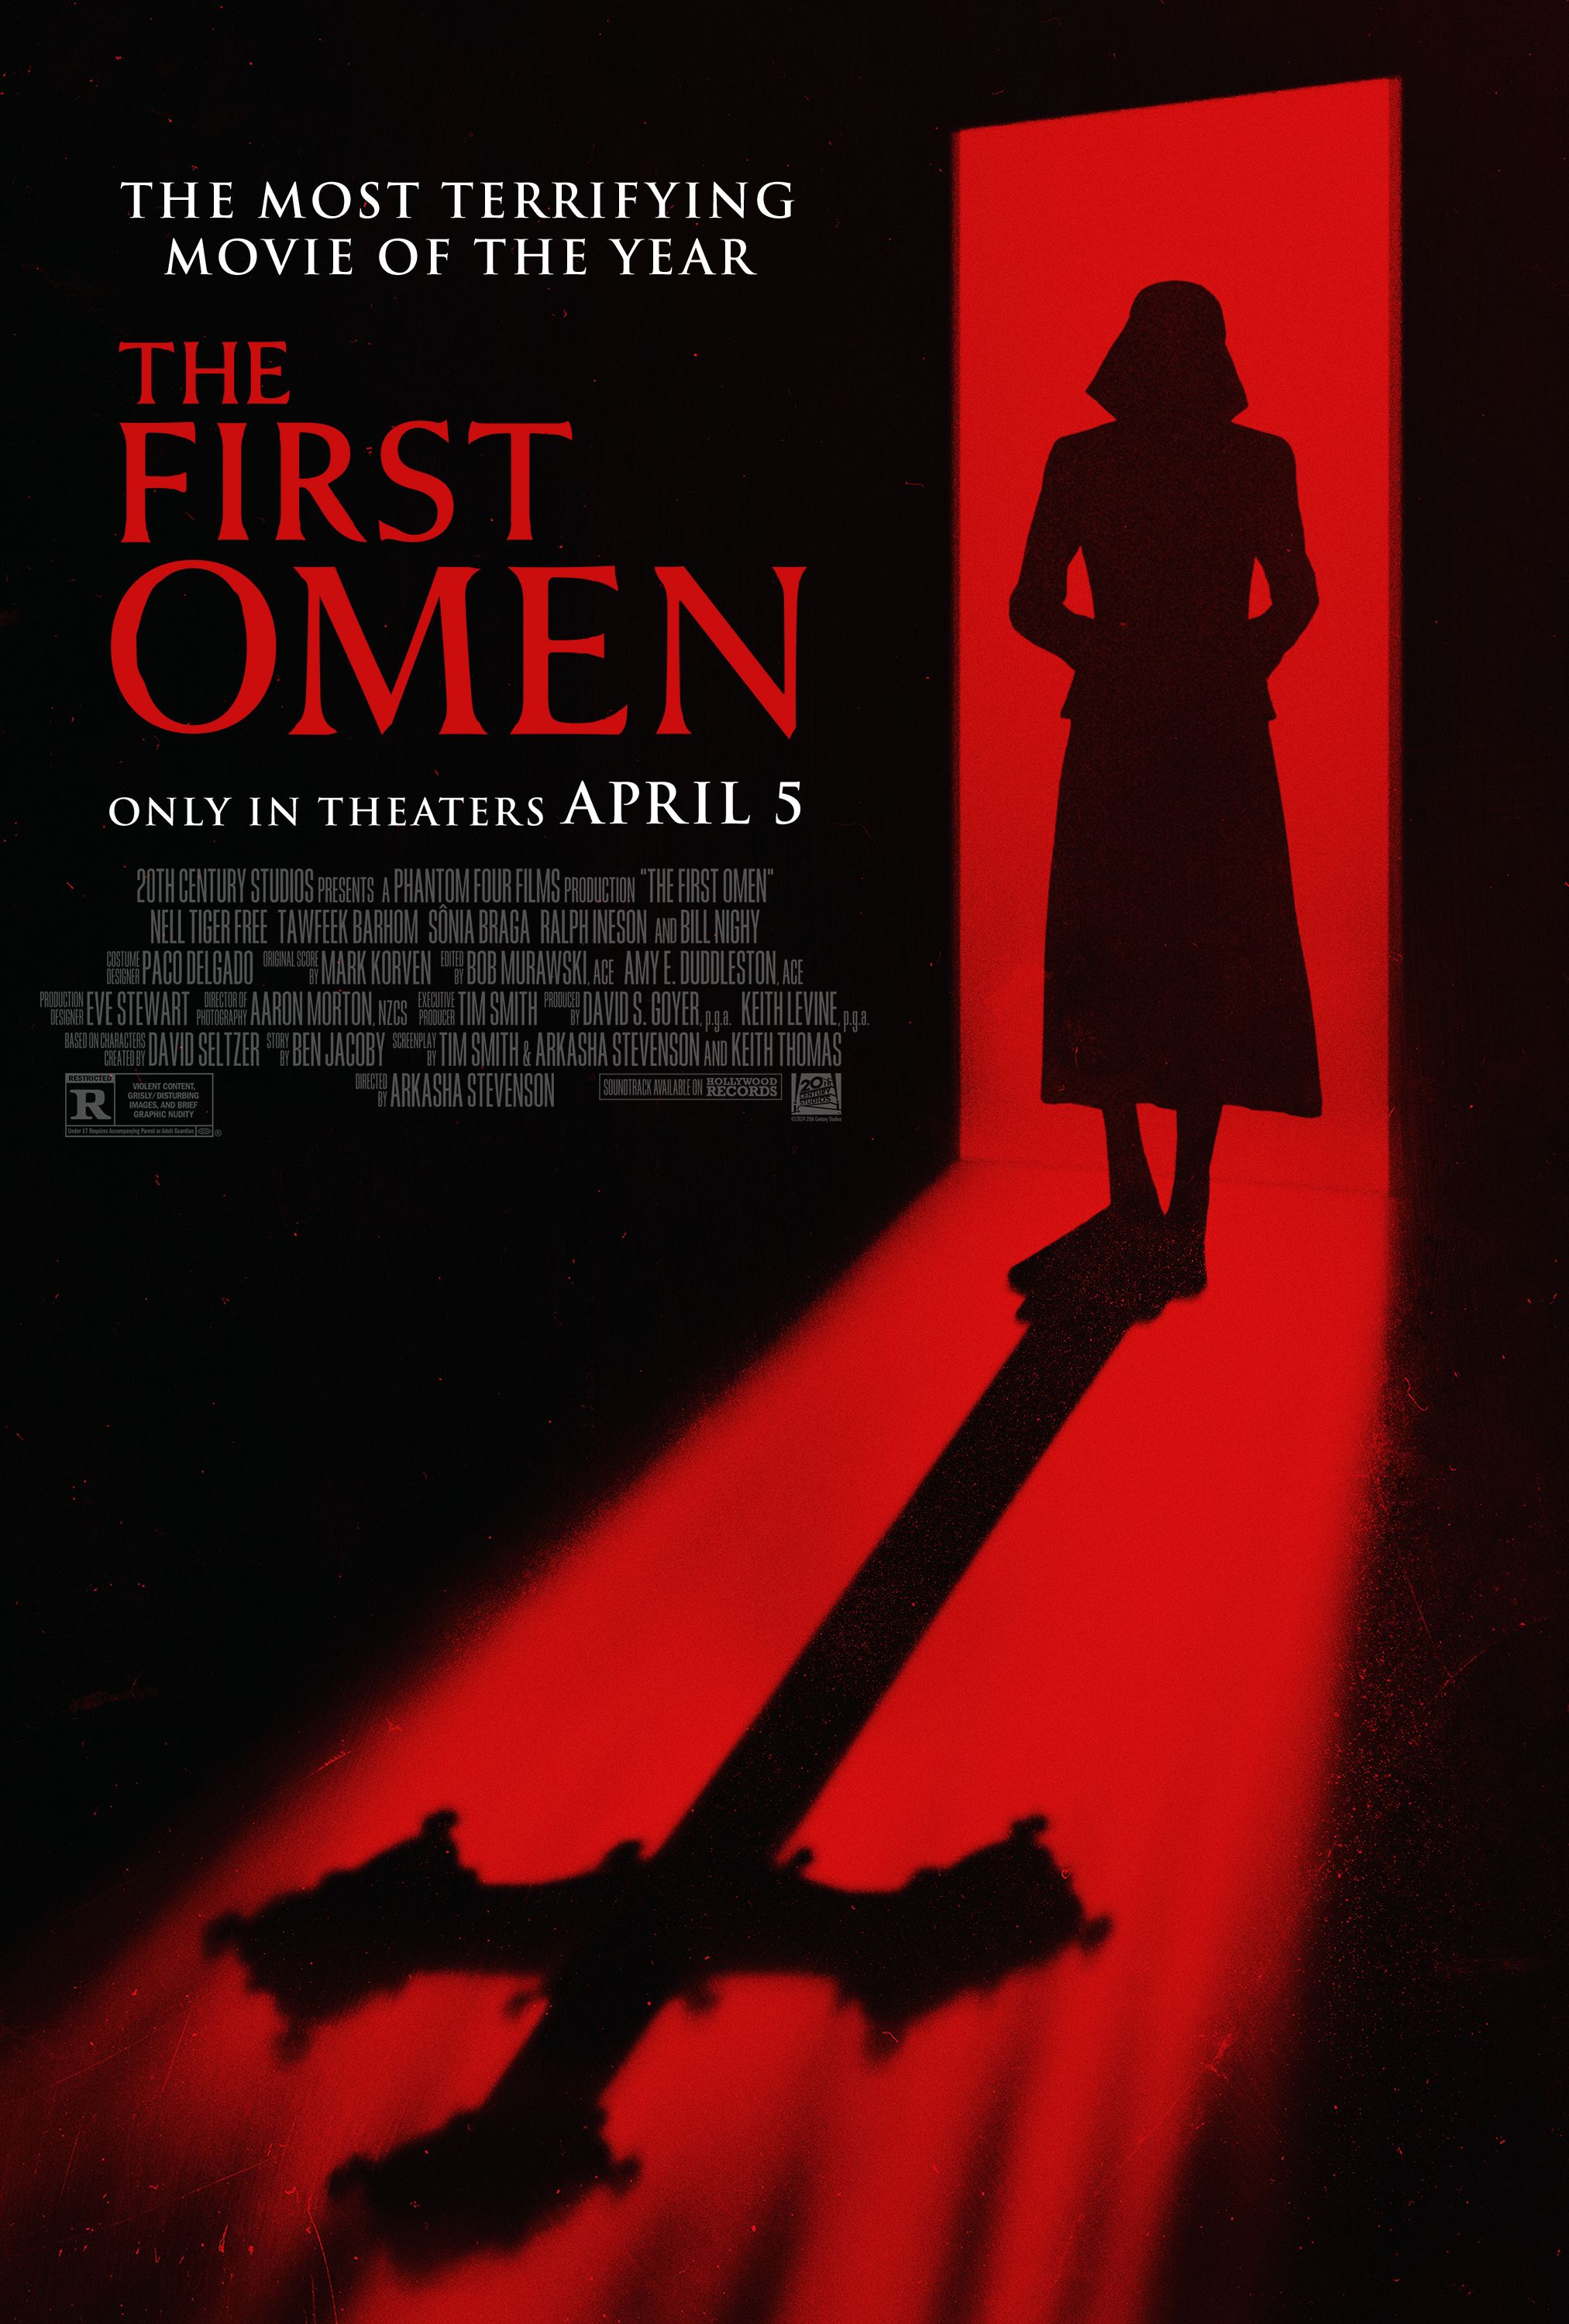 The First Omen Trailer Reveals Eerie First Look at Horror Prequel